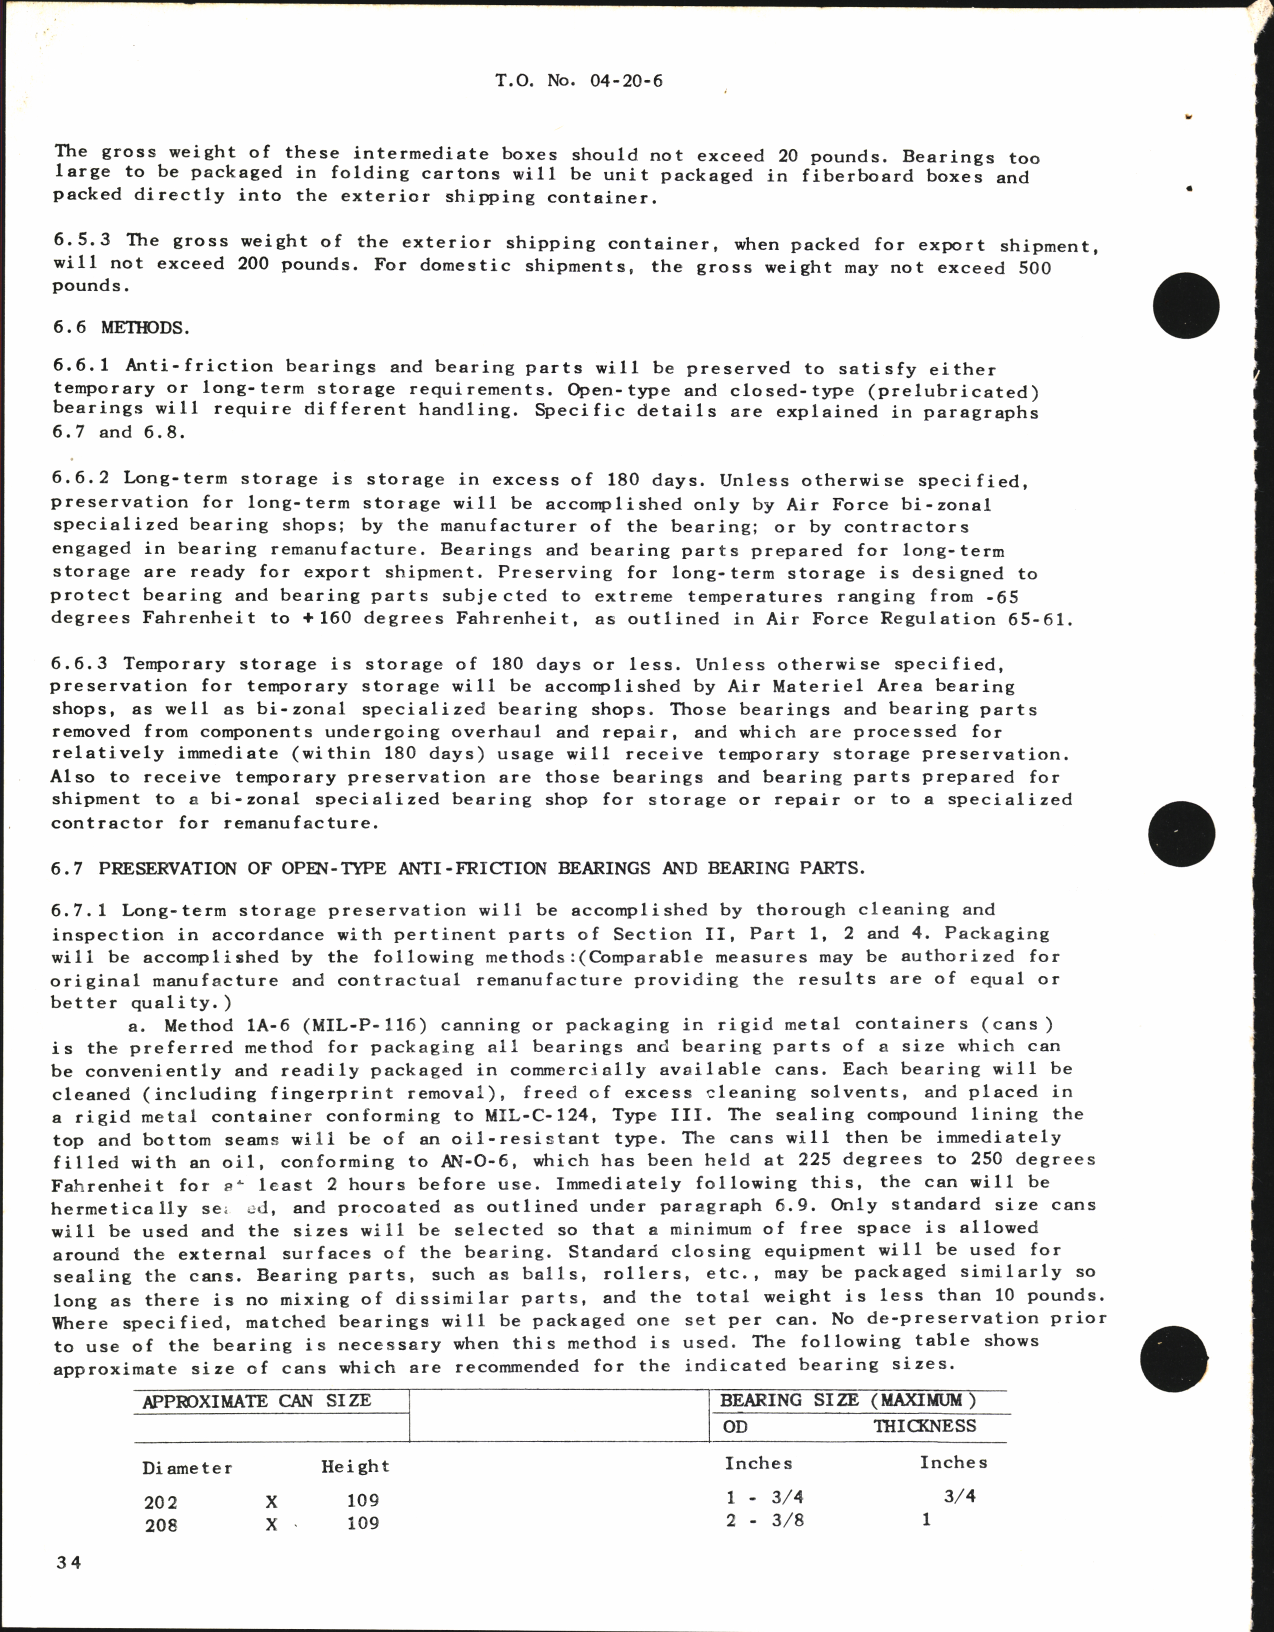 Sample page 8 from AirCorps Library document: Maintenance Instructions for Anti-Friction Bearings